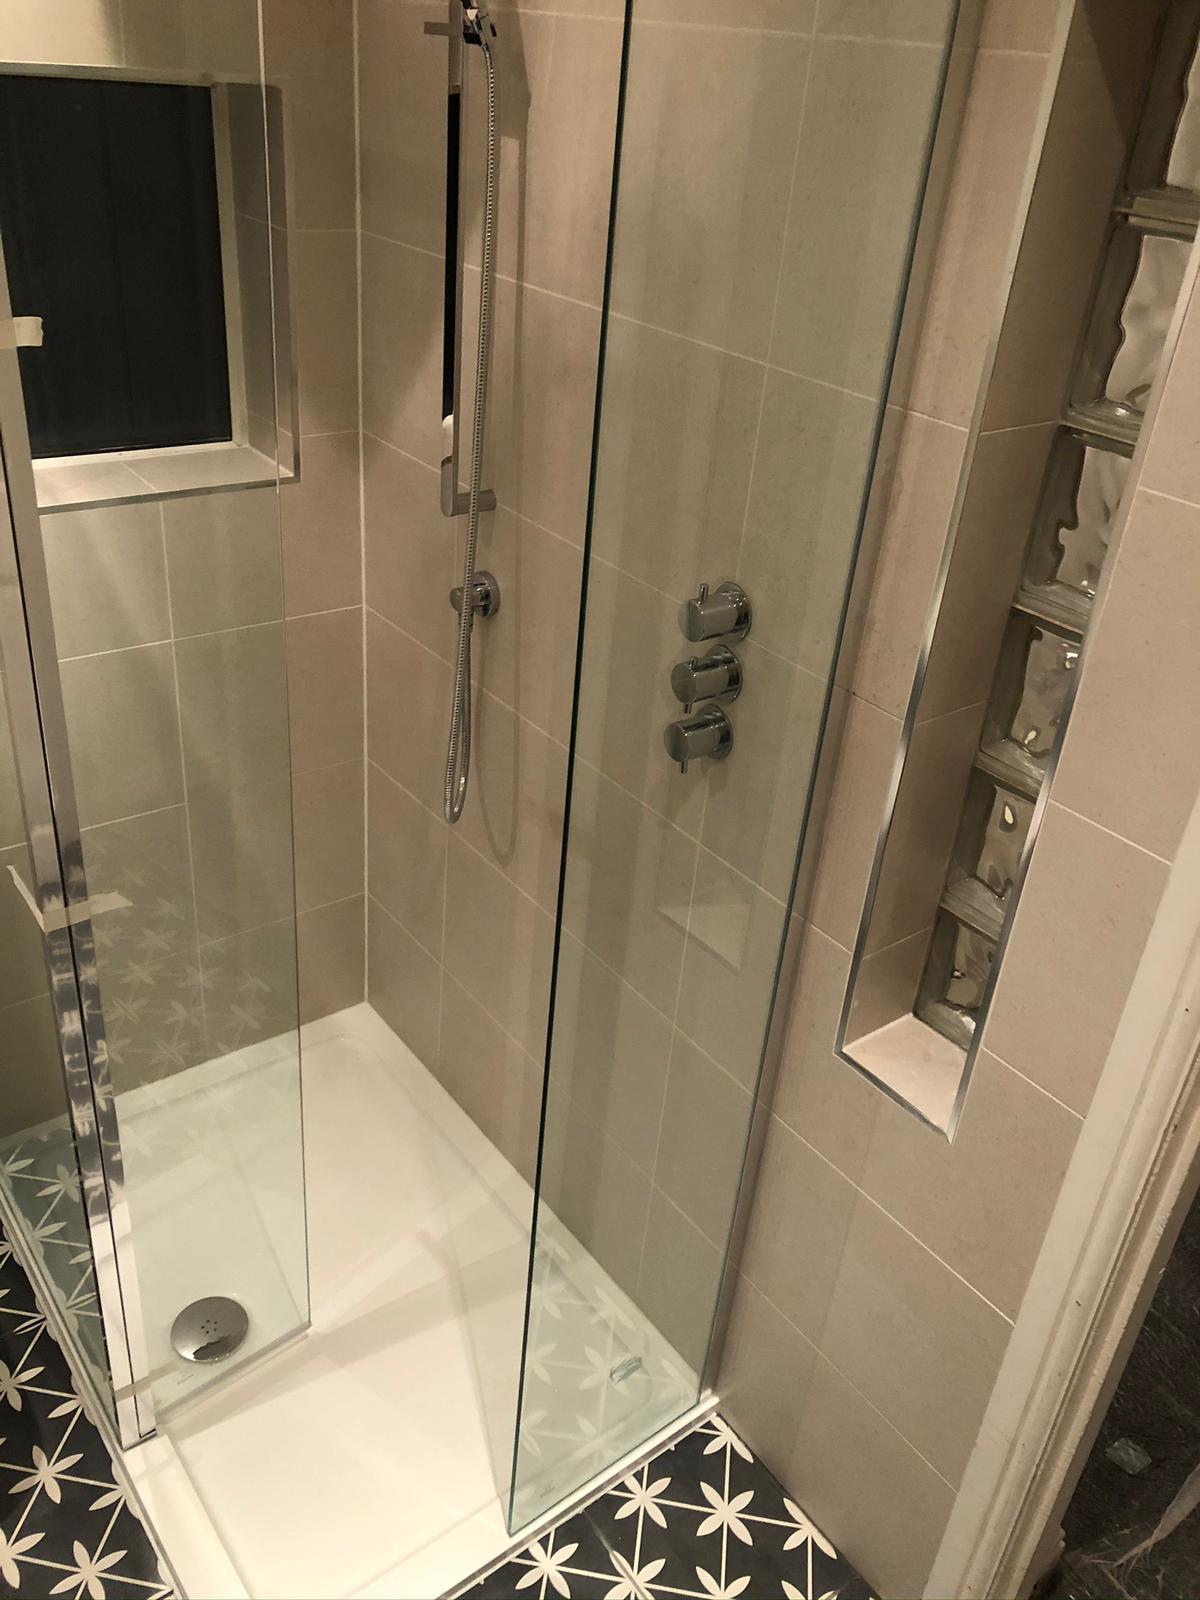 Bathroom renovation complete shower installation with concealed fittings and sanitary wear